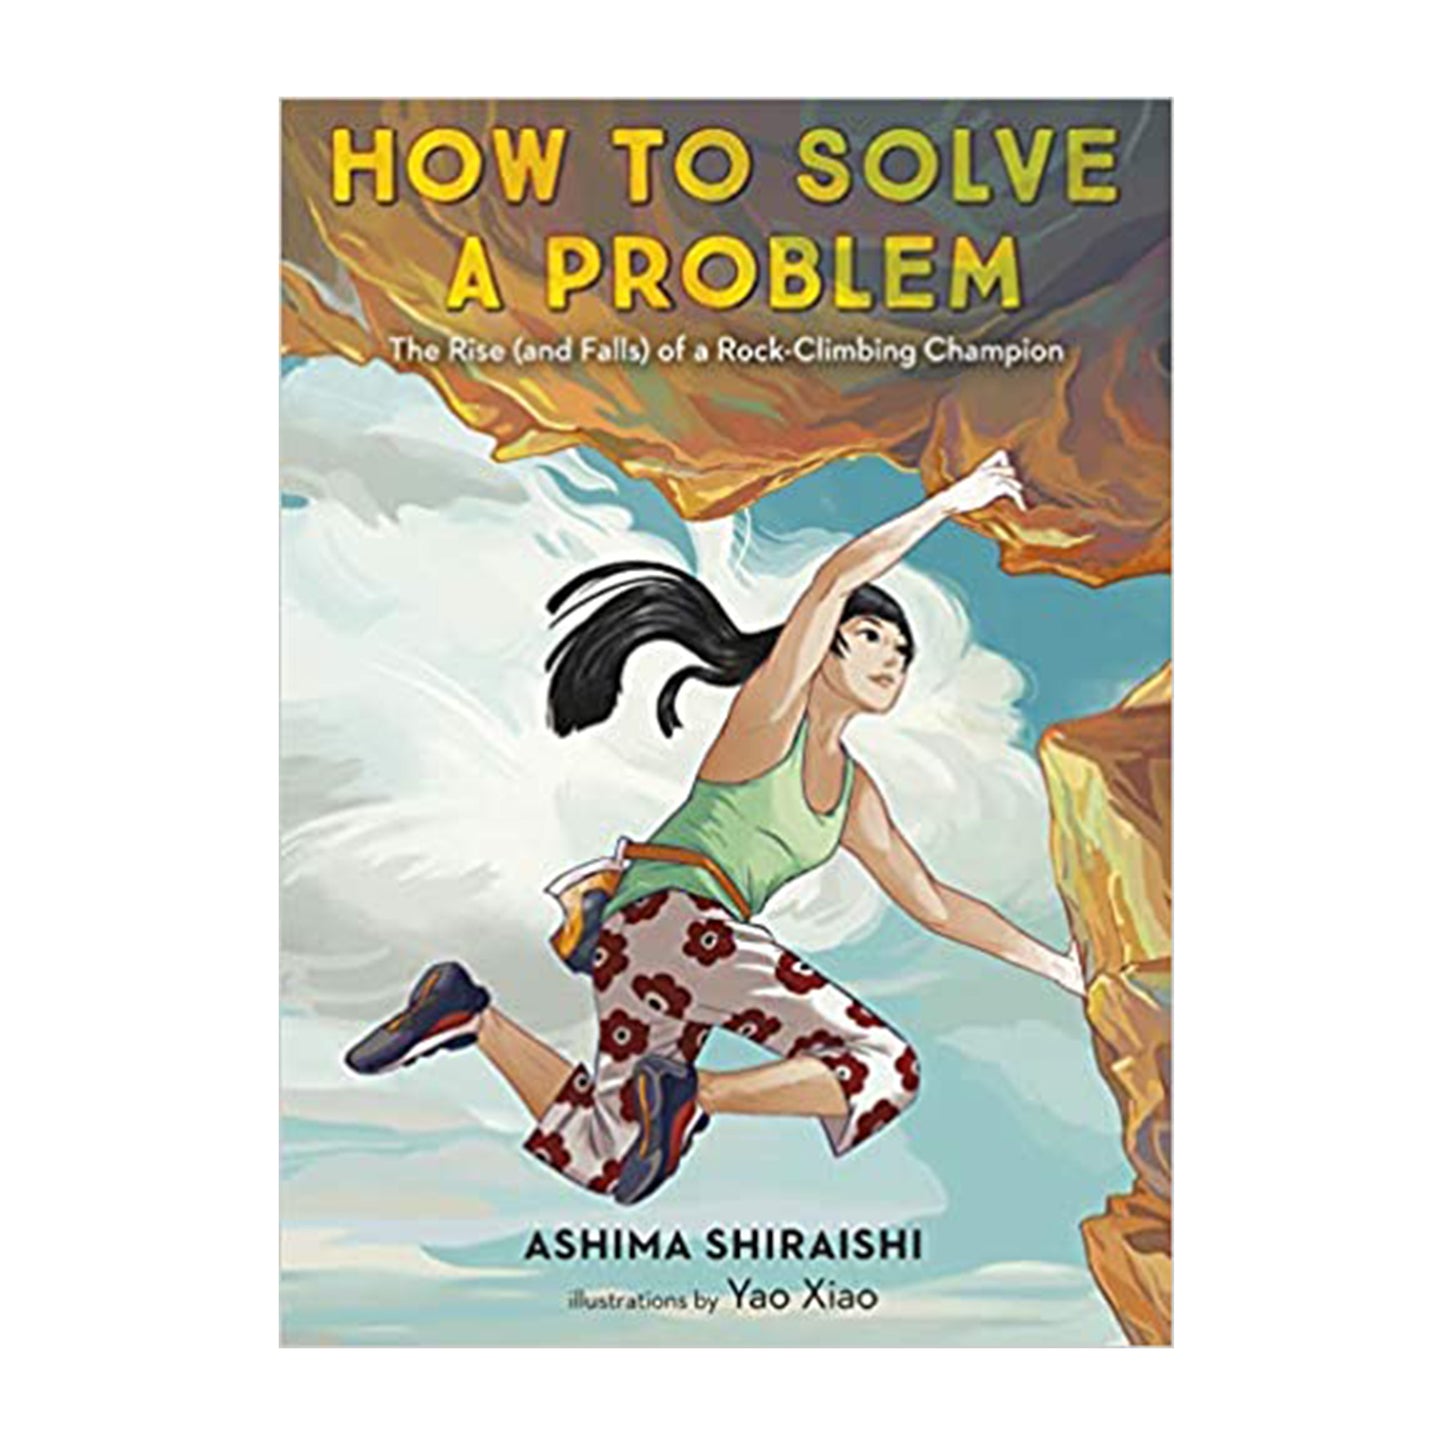 How to Solve a Problem: The Rise (and Falls) of a Rock-Climbing Champion